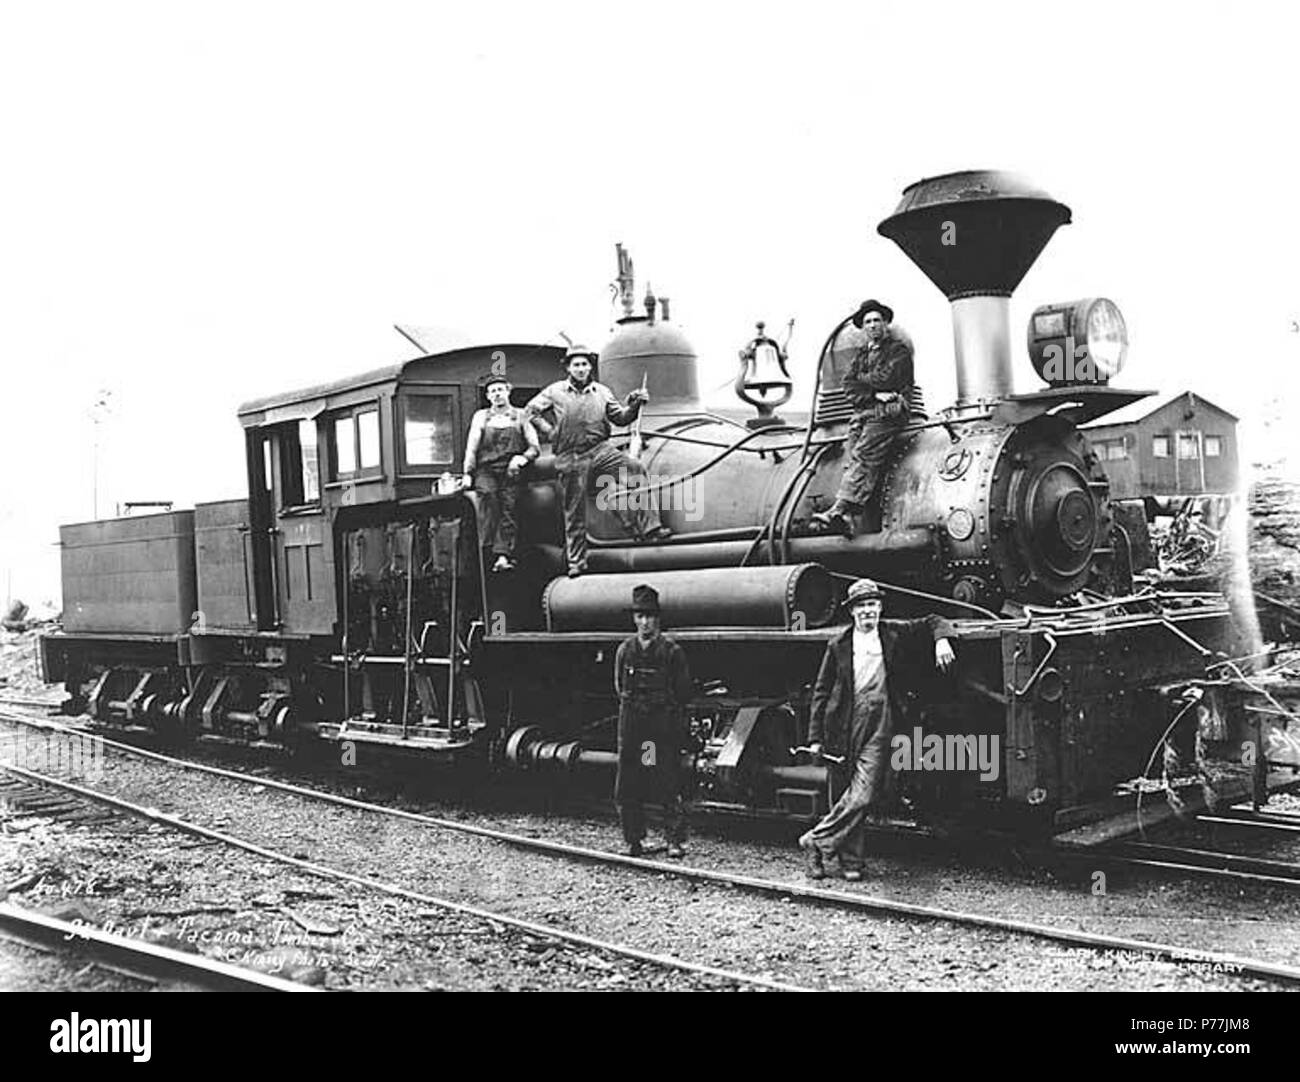 . English: St. Paul and Tacoma Lumber Company's three-truck Shay locomotive no. 4, ca. 1922 . English: Caption on image: St. Paul & Tacoma Timber Co. C. Kinsey Photo, Seattle. No. 478 PH Coll 516.3302 On June 4, 1888, the St. Paul & Tacoma Lumber Co. incorporates. The incorporators are lumber and real estate magnates who arrive that day by train from Minnesota and Wisconsin. The next day Tacoma headlines shout the event: 'The monster milling company of Tacoma organized.' The firm, known locally as the St. Paul, spurs what the historian Murray Morgan calls the greatest boom in Tacoma's history. Stock Photo